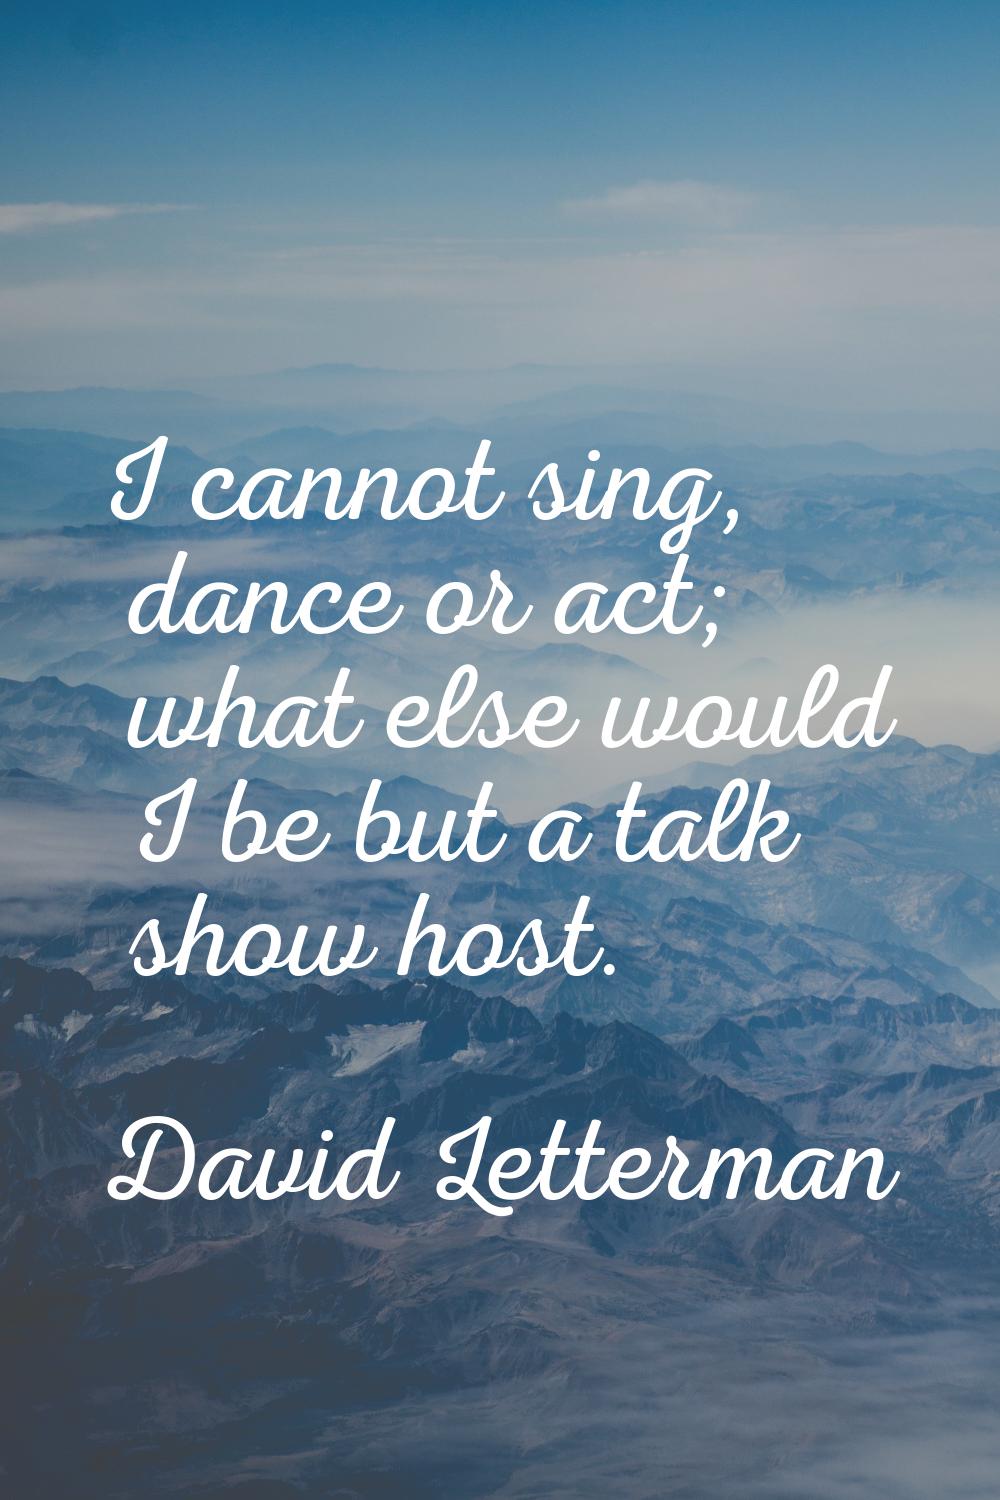 I cannot sing, dance or act; what else would I be but a talk show host.